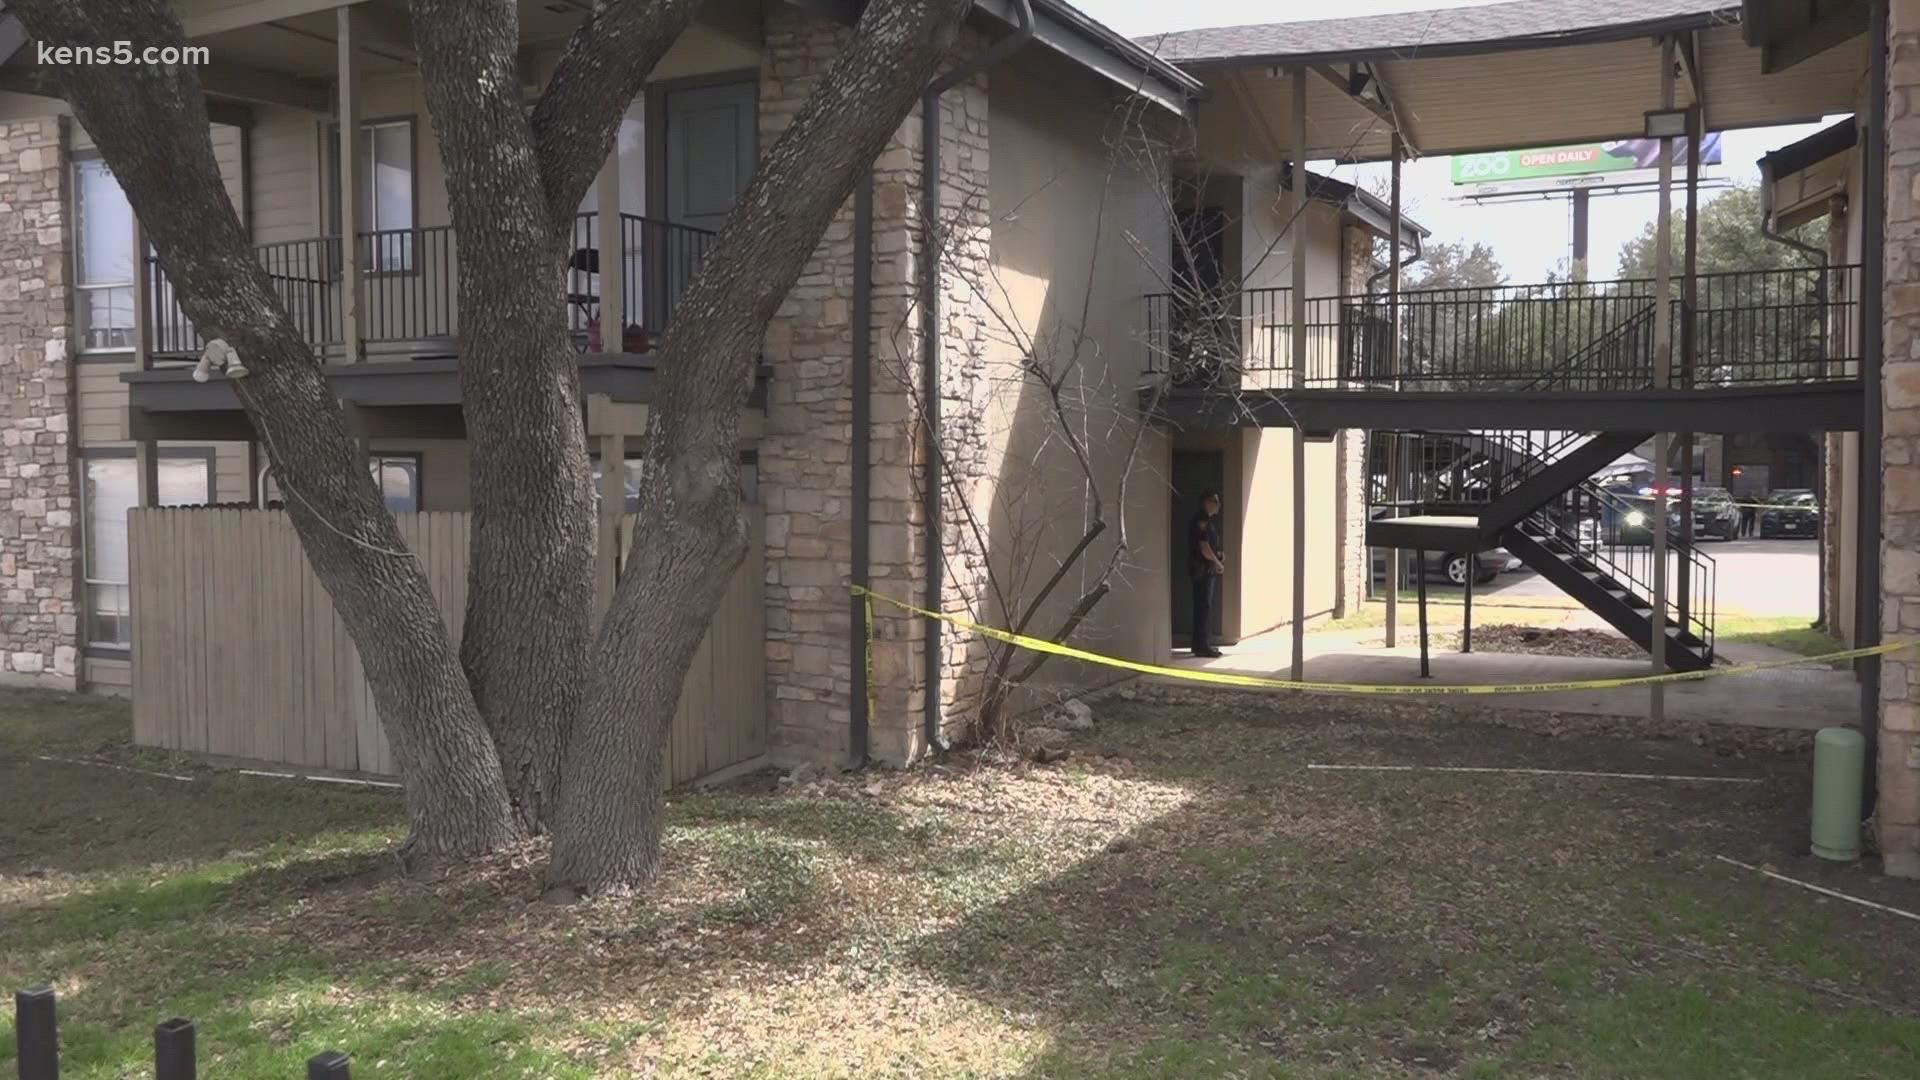 A man and a woman were found shot to death at an apartment complex off Parkdale Street, SAPD Chief William McManus said. Michael Burger, 20, was arrested.